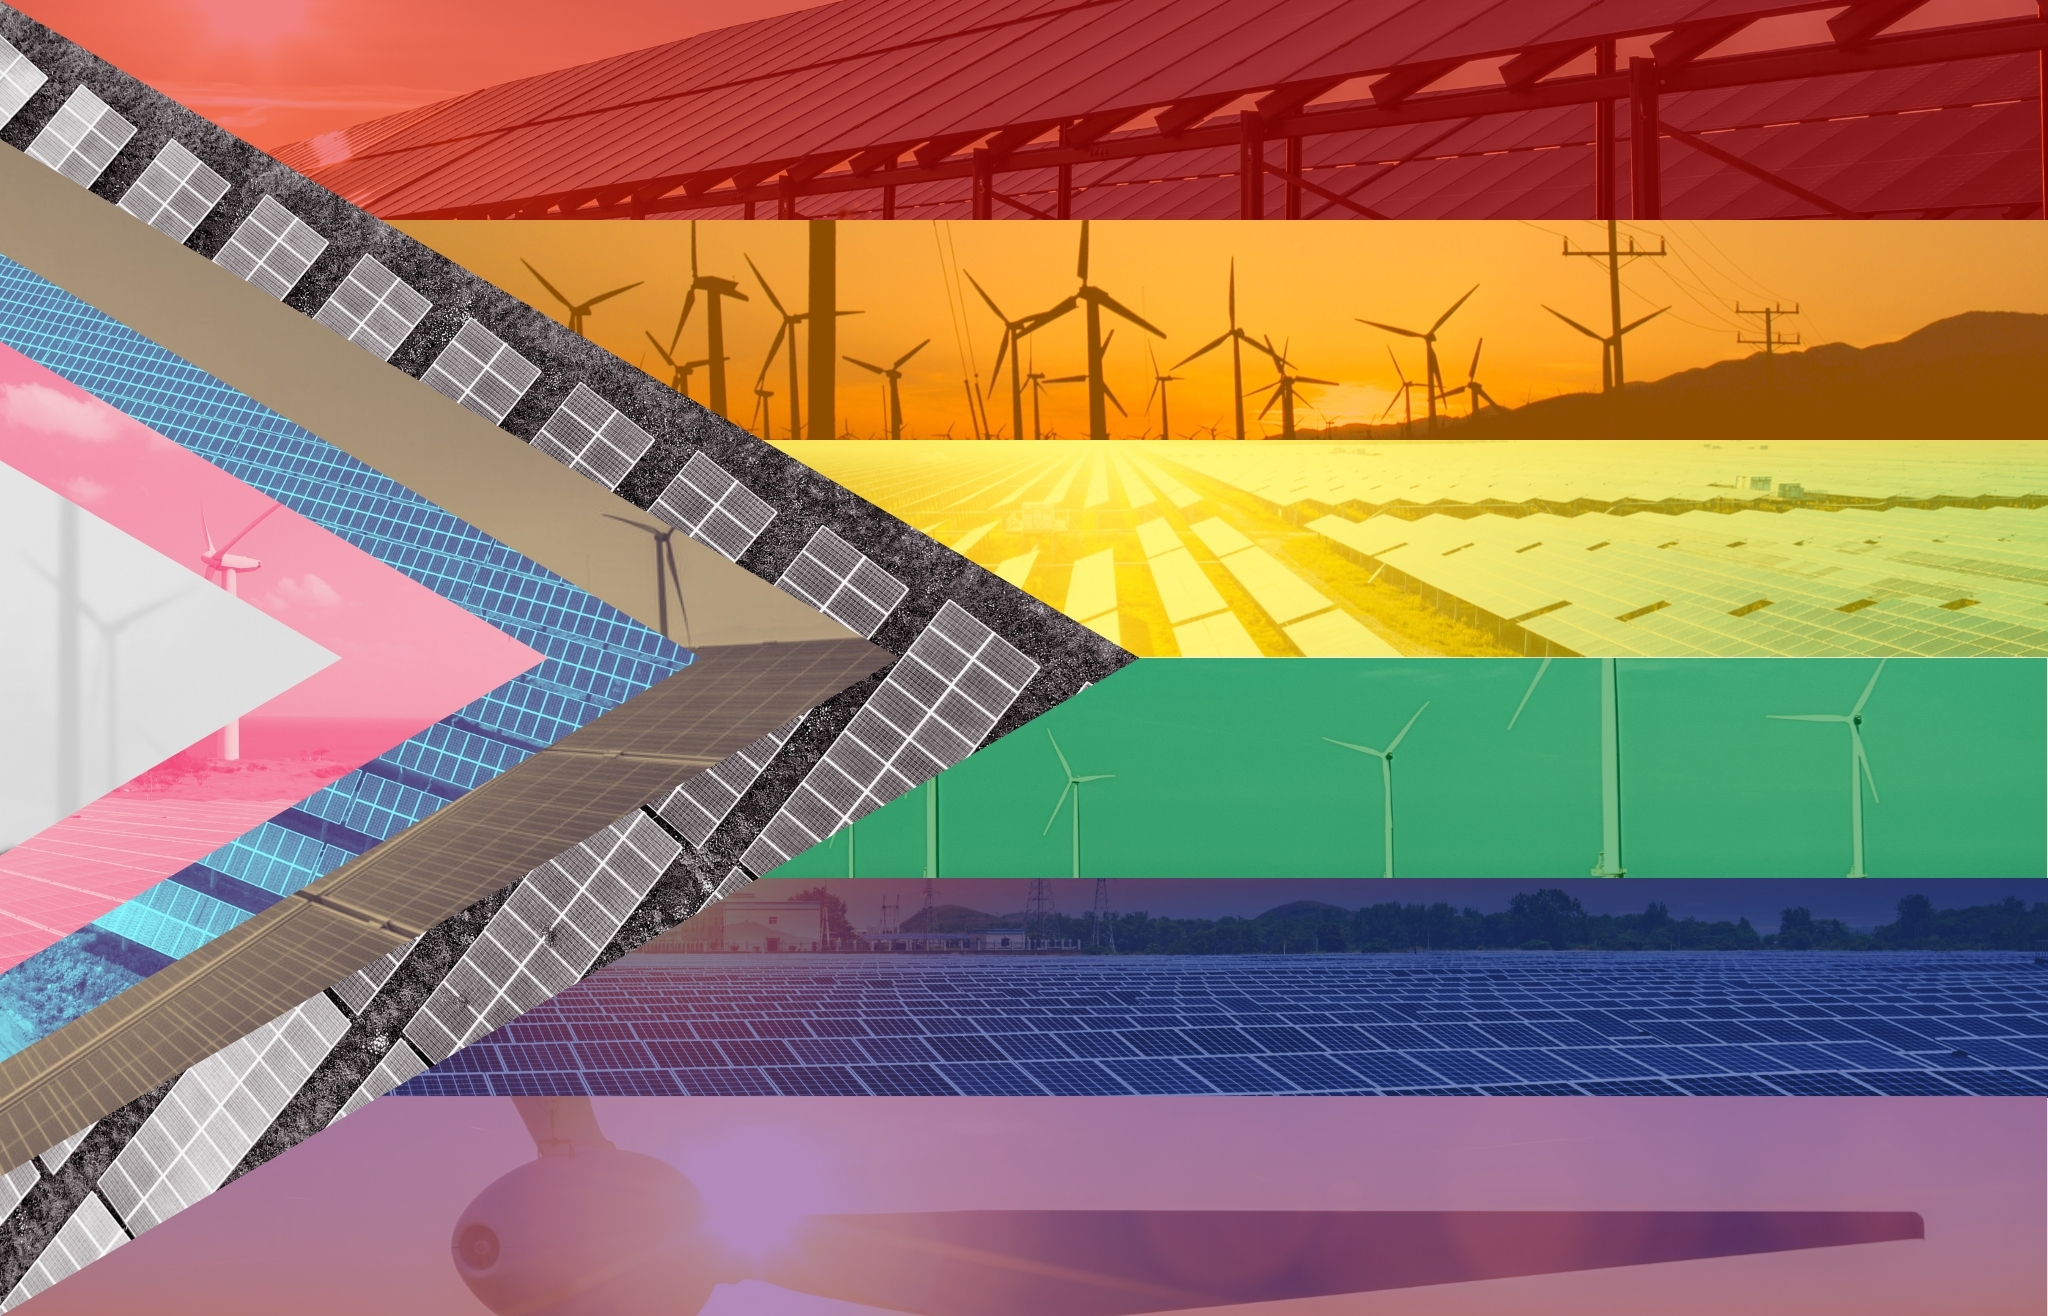 Renewable energy with wind turbines and solar panels in a Pride flag